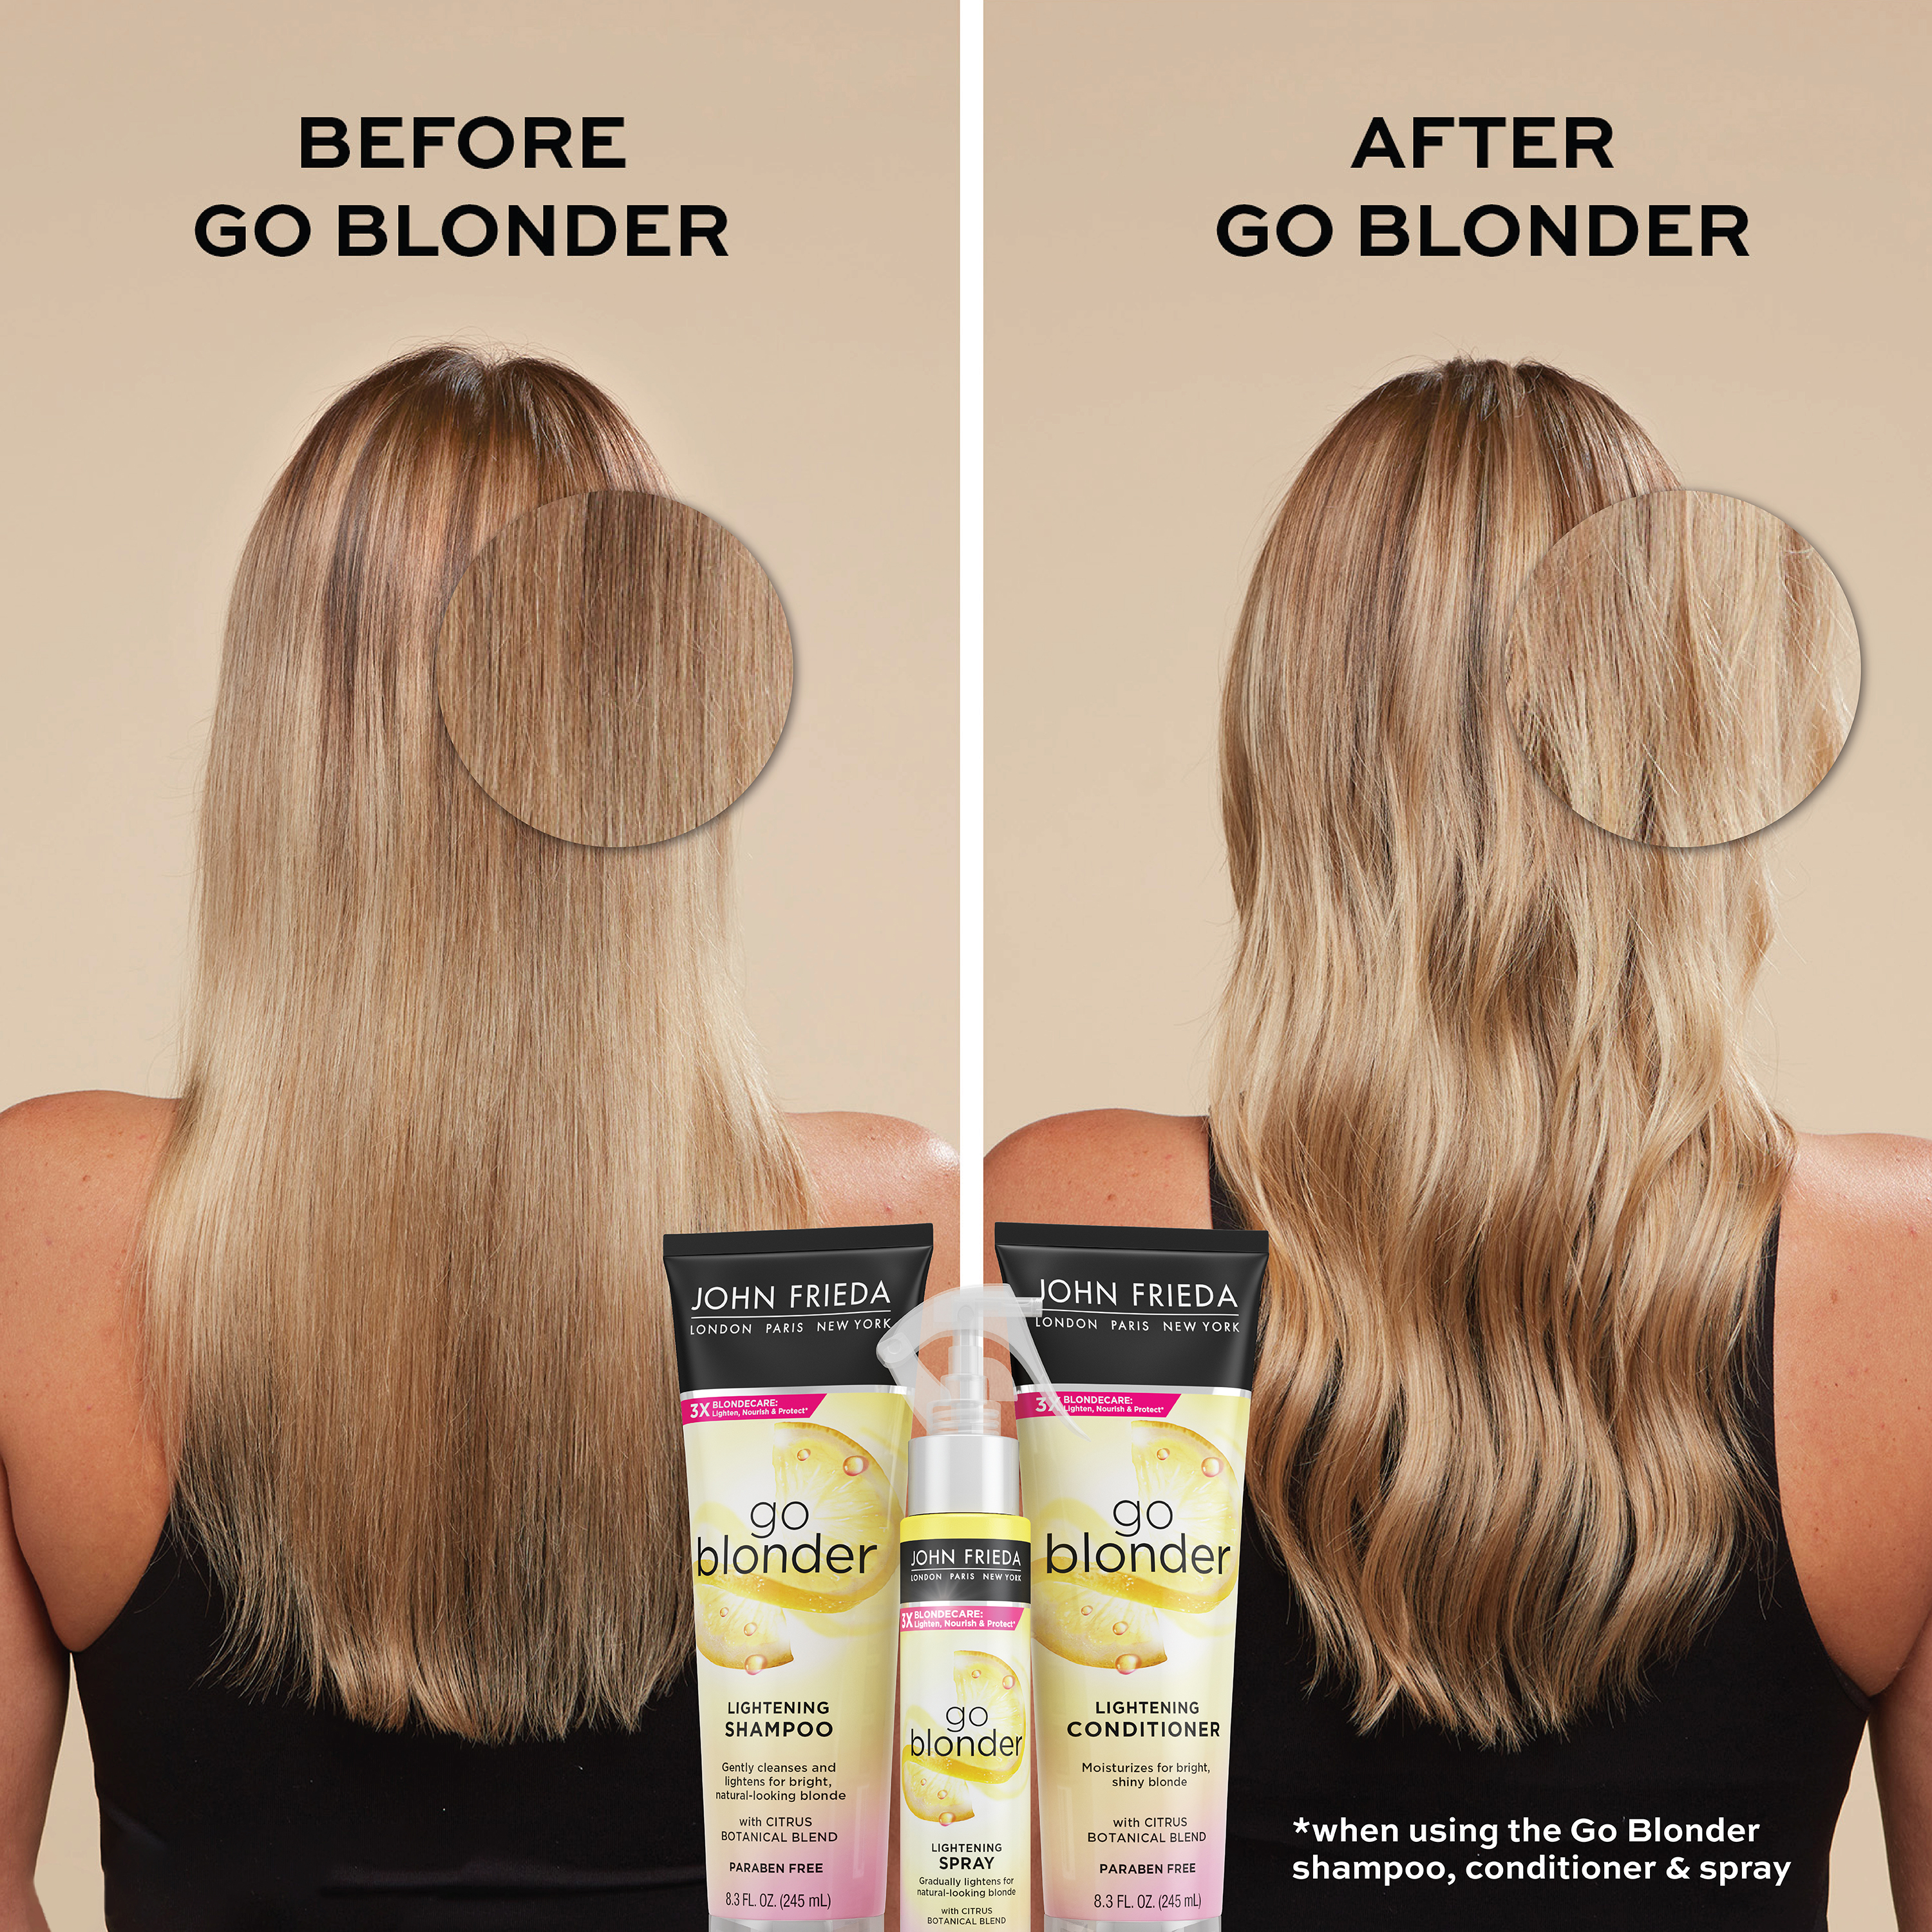 Before/after hair image after using the Go Blonder collection.